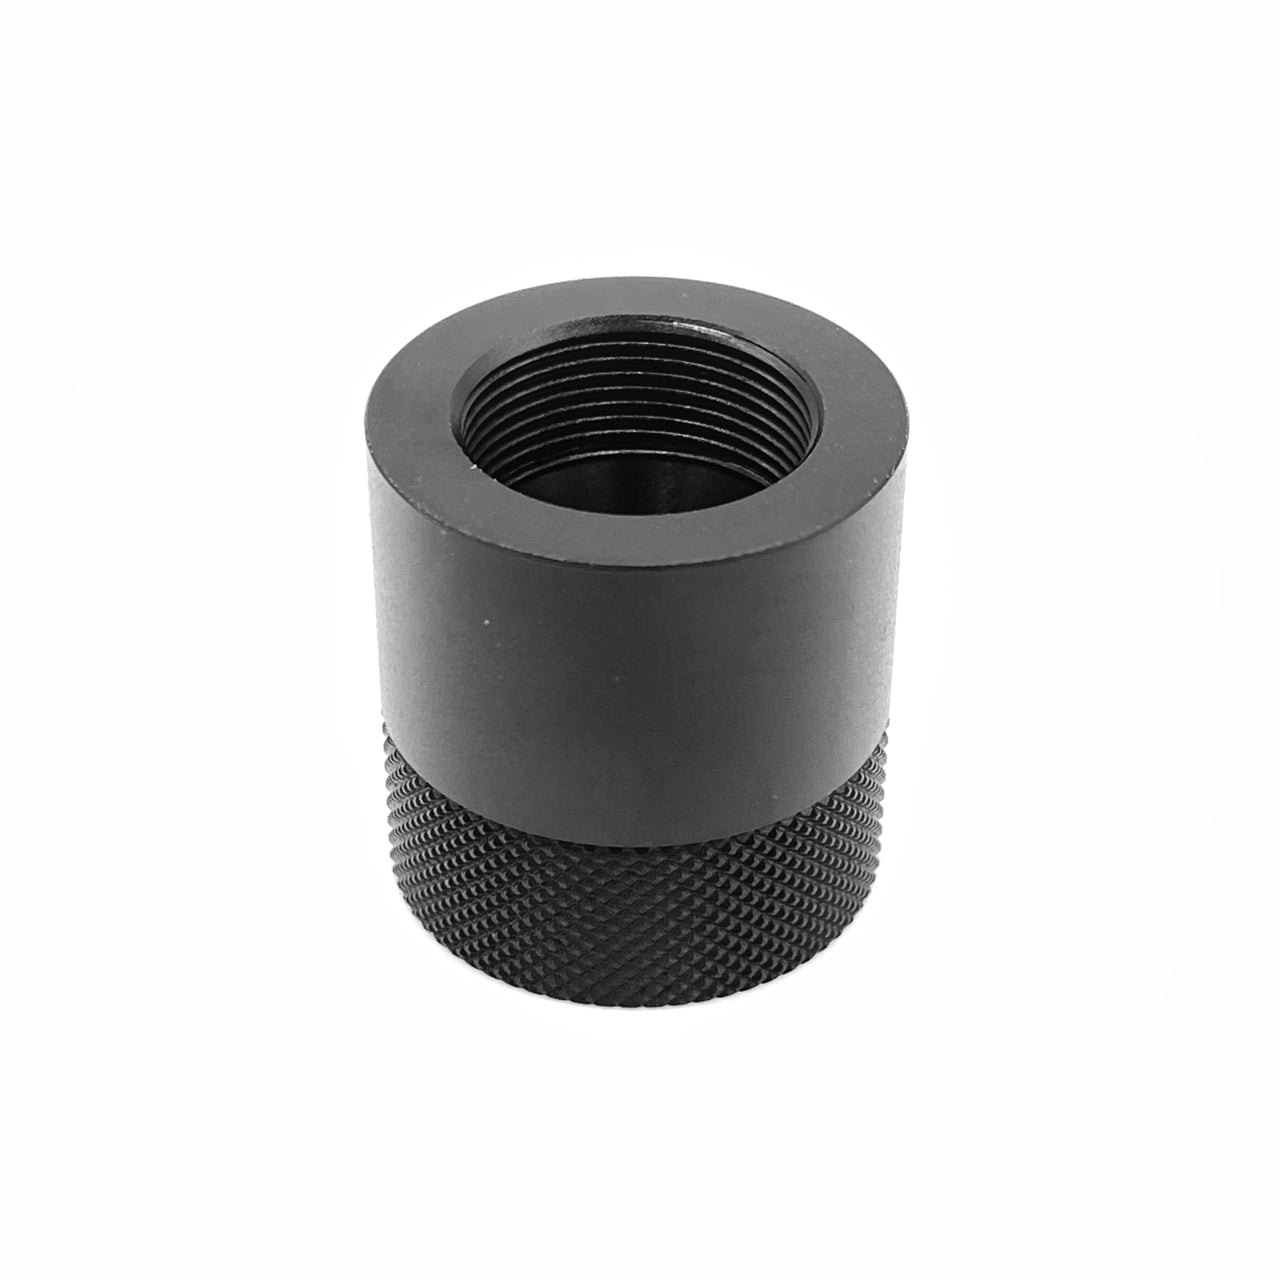 Daystate Delta Wolf M20x1 to 1/2 x 20 Adapter A96